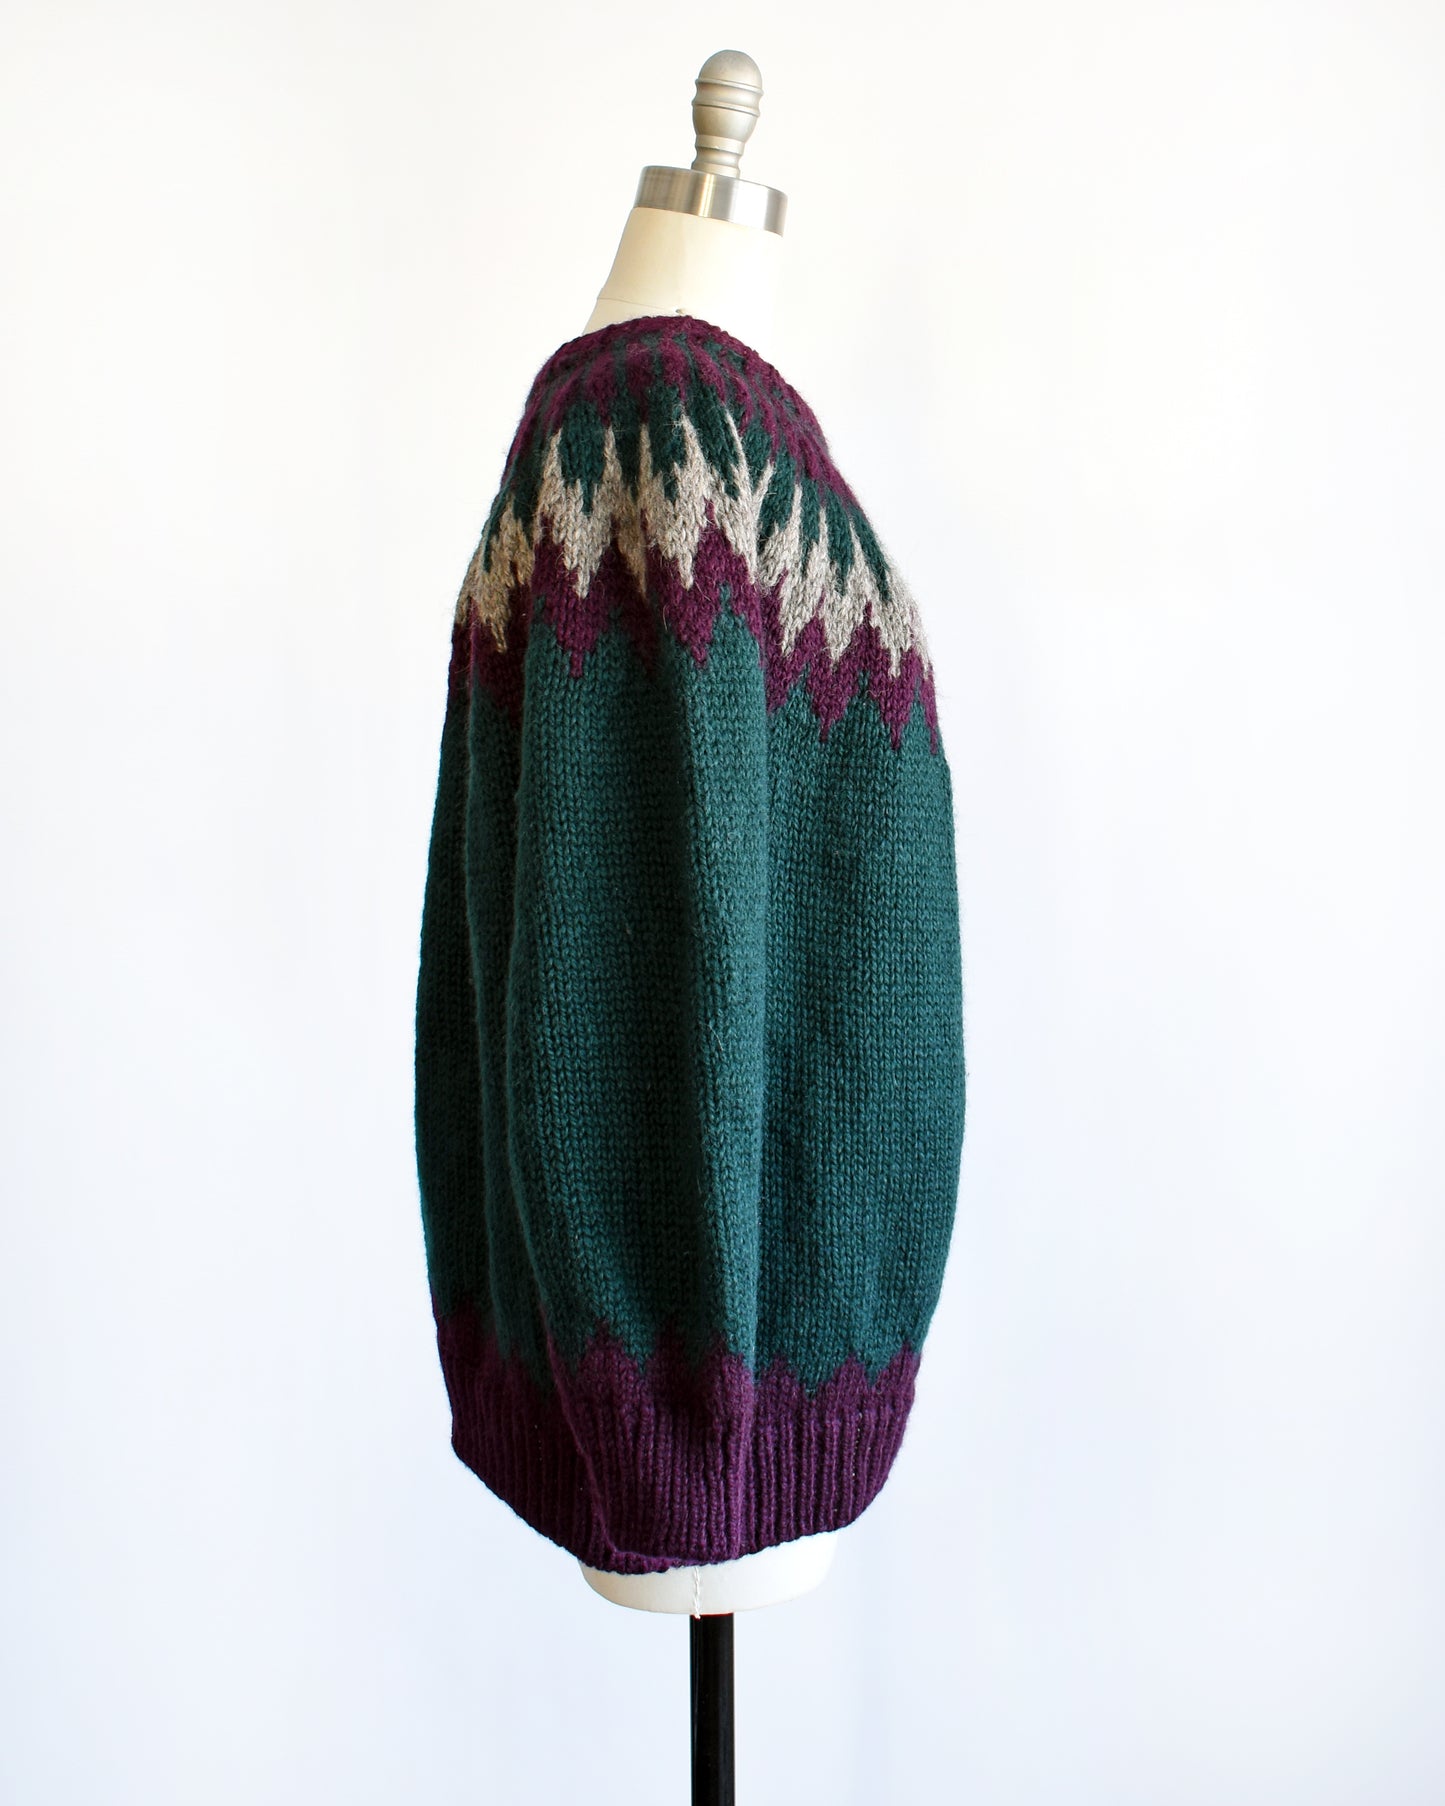 Side view of a vintage 1970s dark teal wool Nordic sweater with a purple and gray Fair Isle pattern around the collar. Complimentary purple pattern on the hem and cuffs.